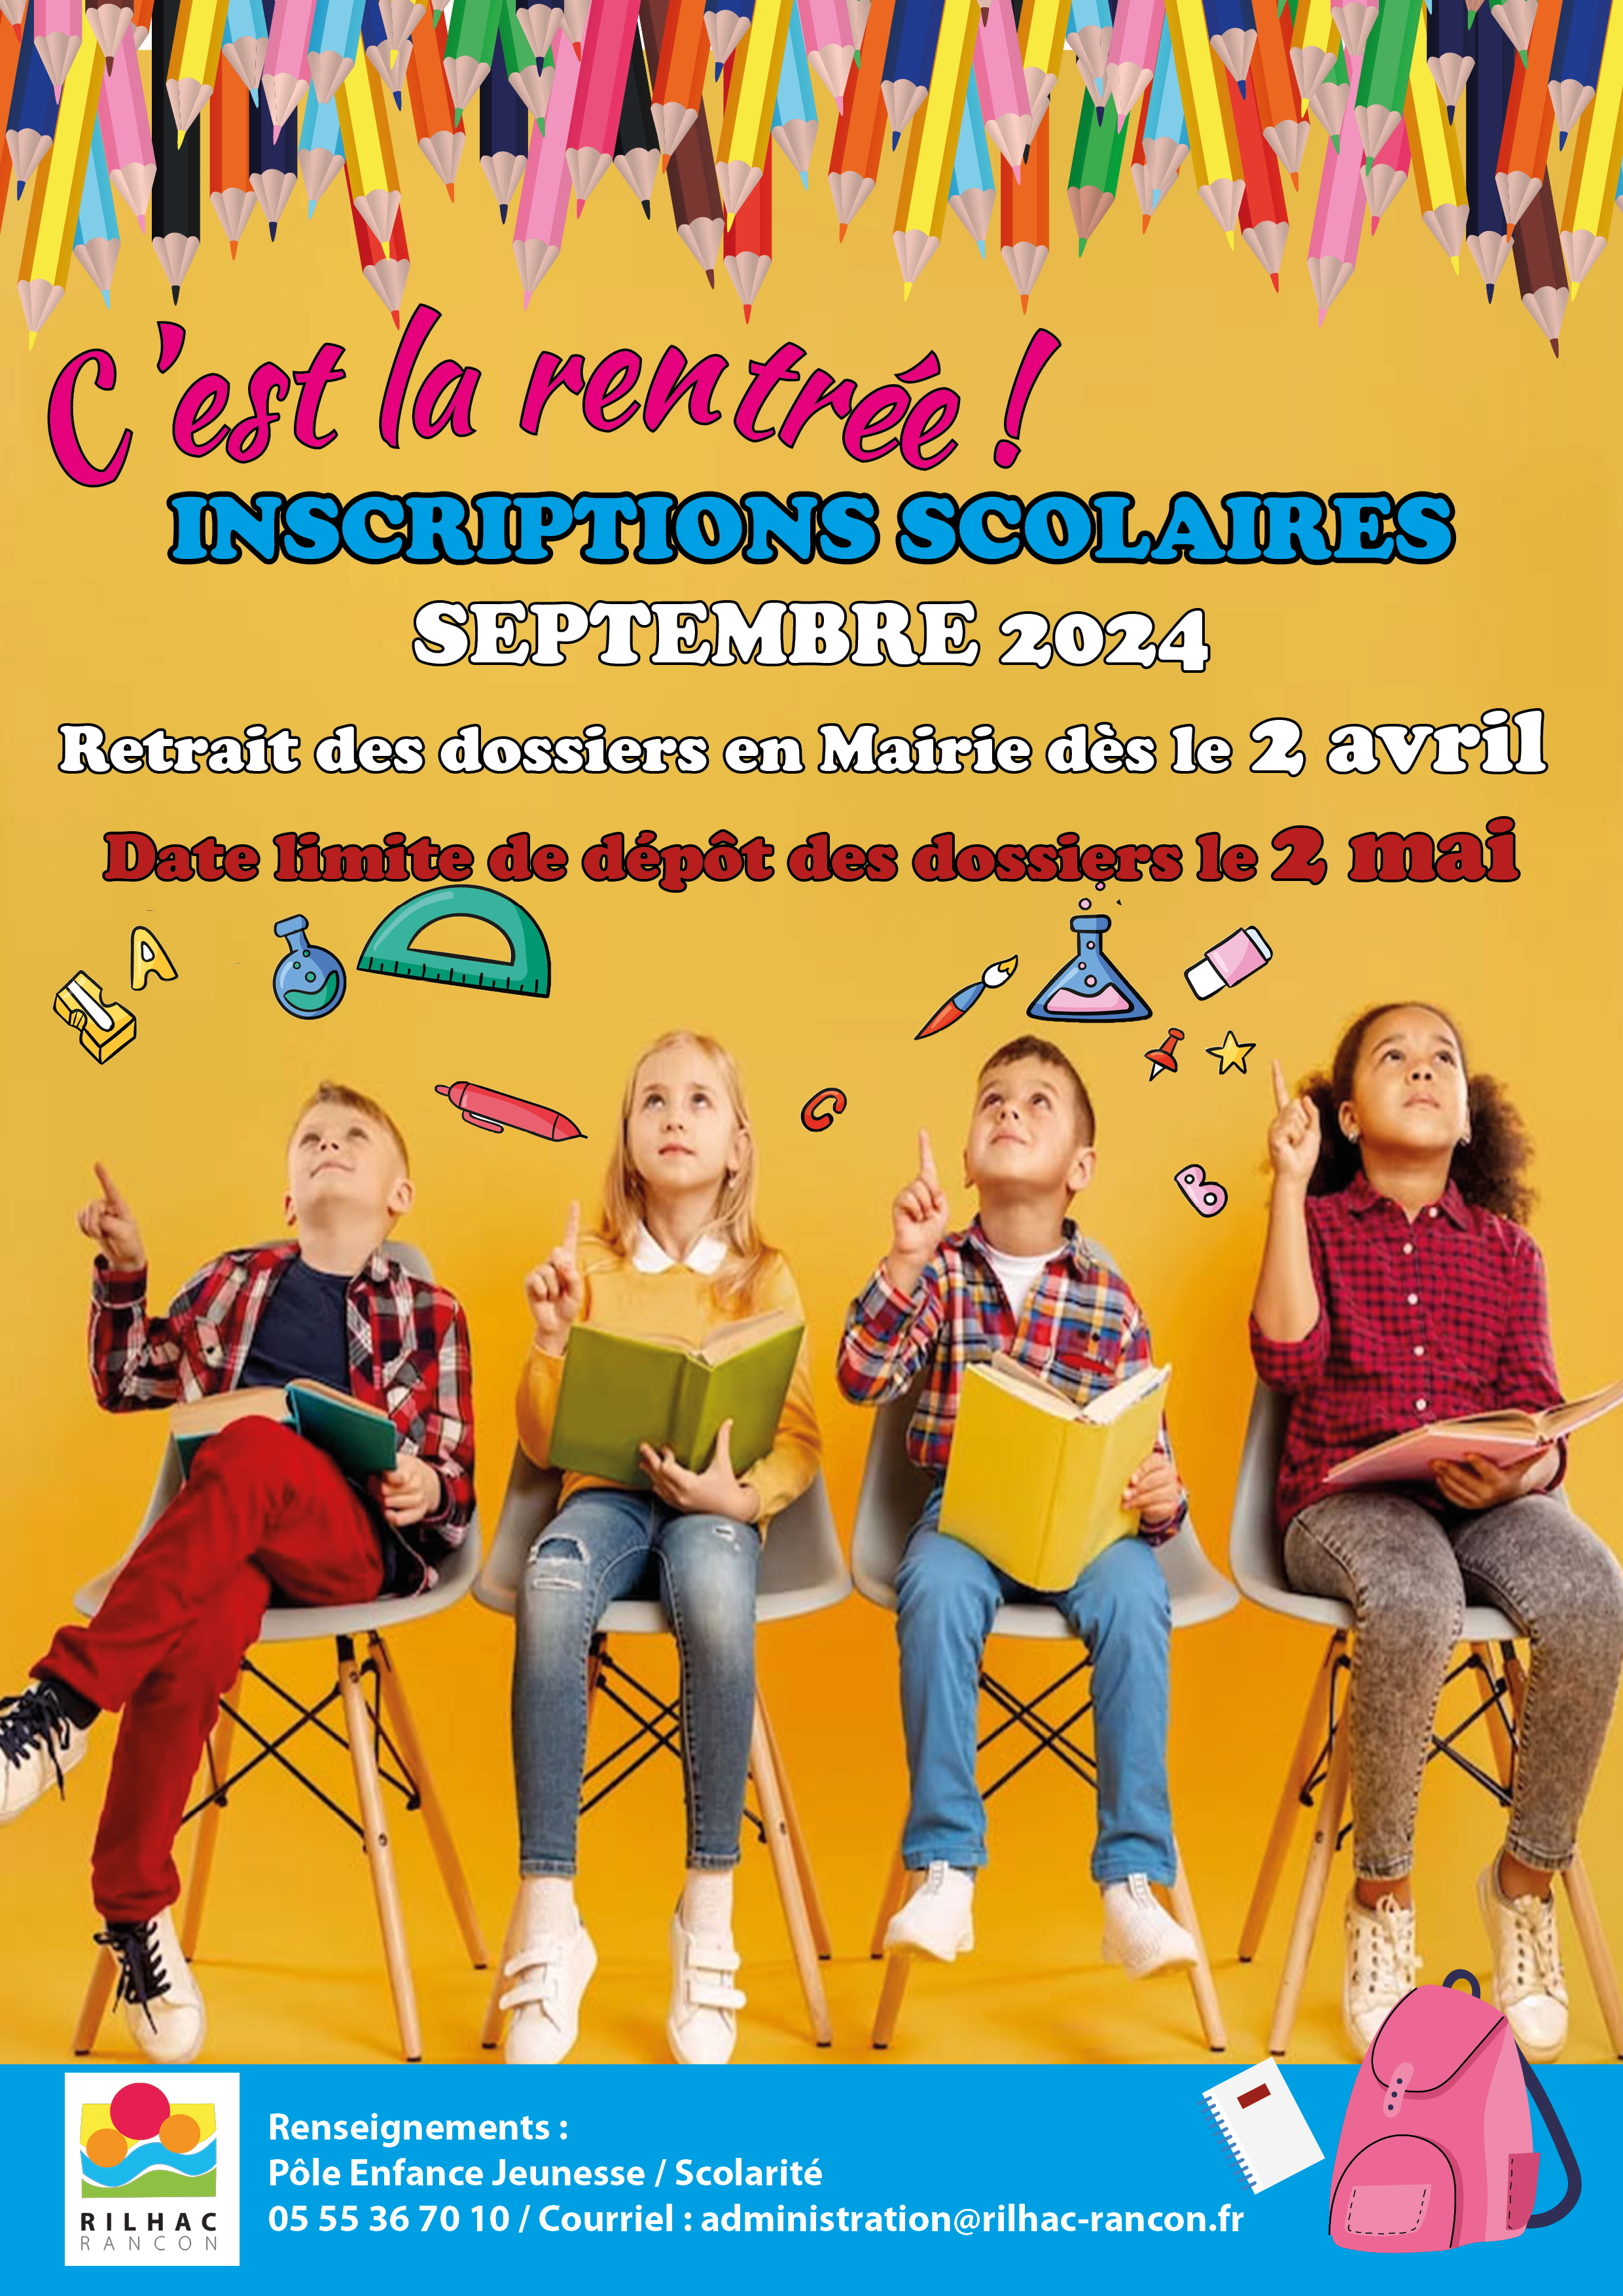 Affiche 30 x 40 _A3_ 2024 RENTREE SCOLAIRE RVB HD.jpg